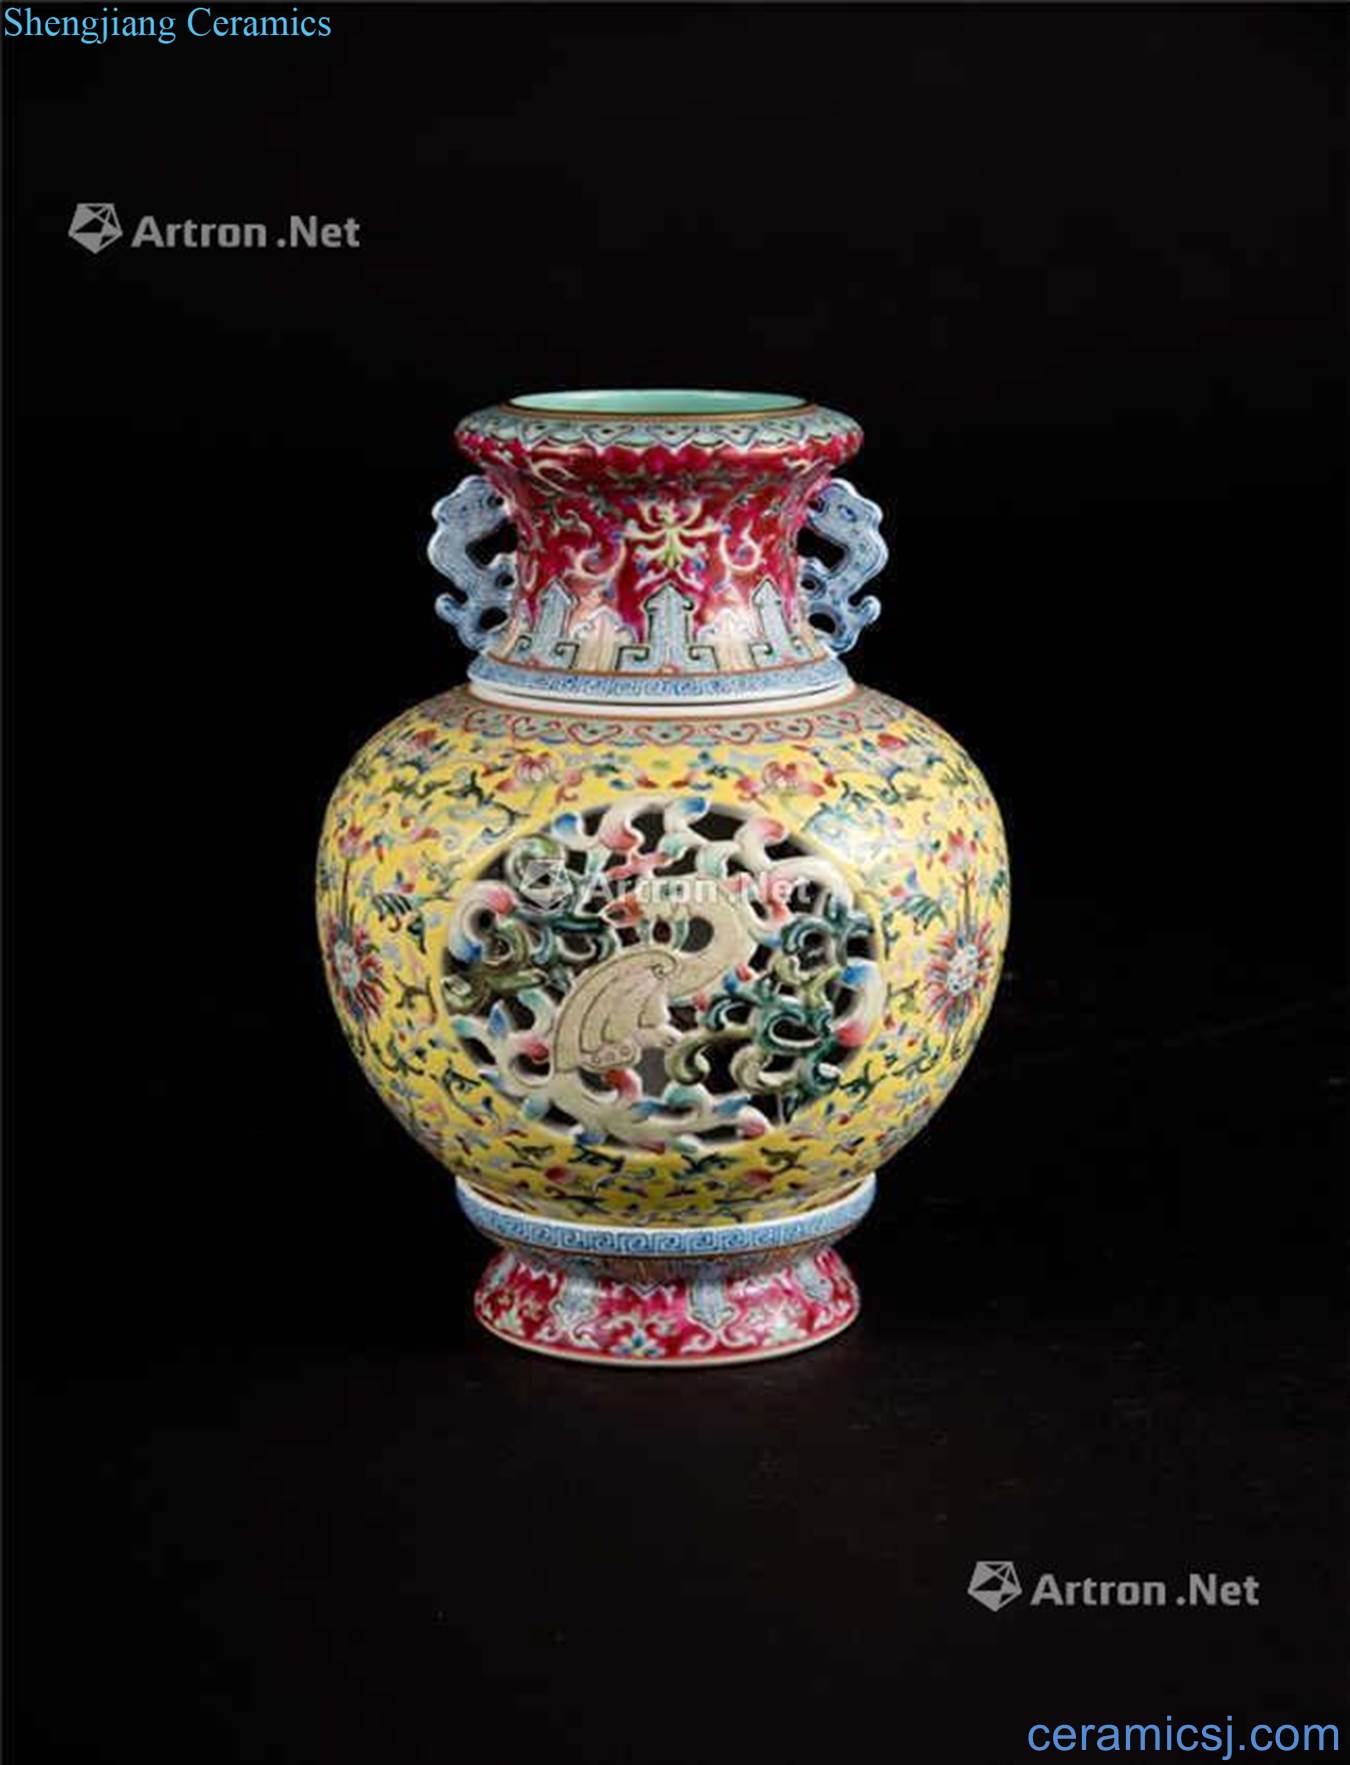 The qing dynasty Pastel yellow bottom heart bottle